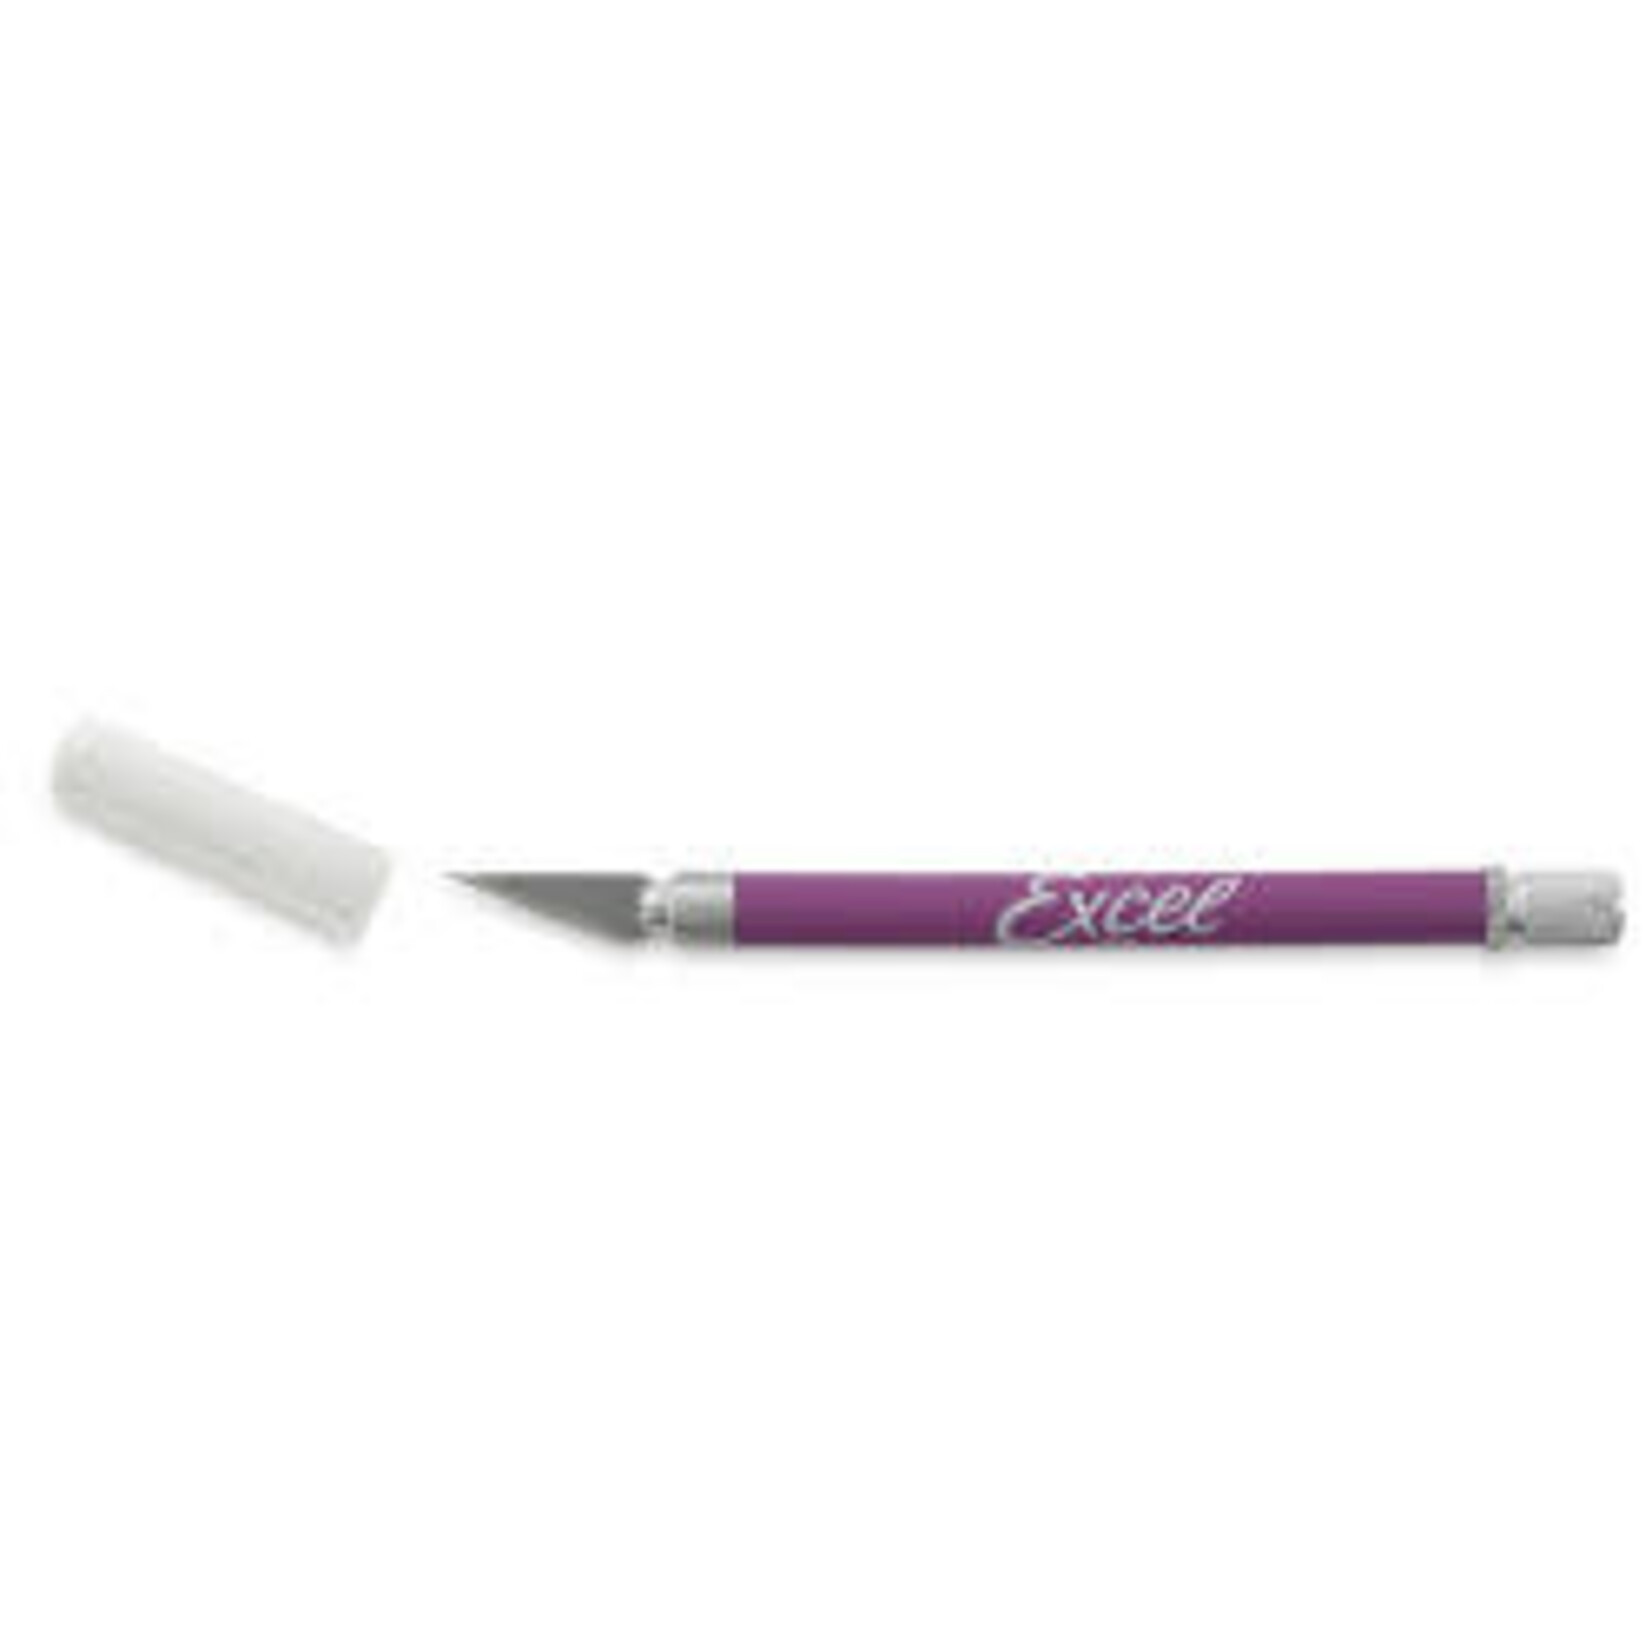 Excel K18 Grip-On Knife Purple with Safety Cap